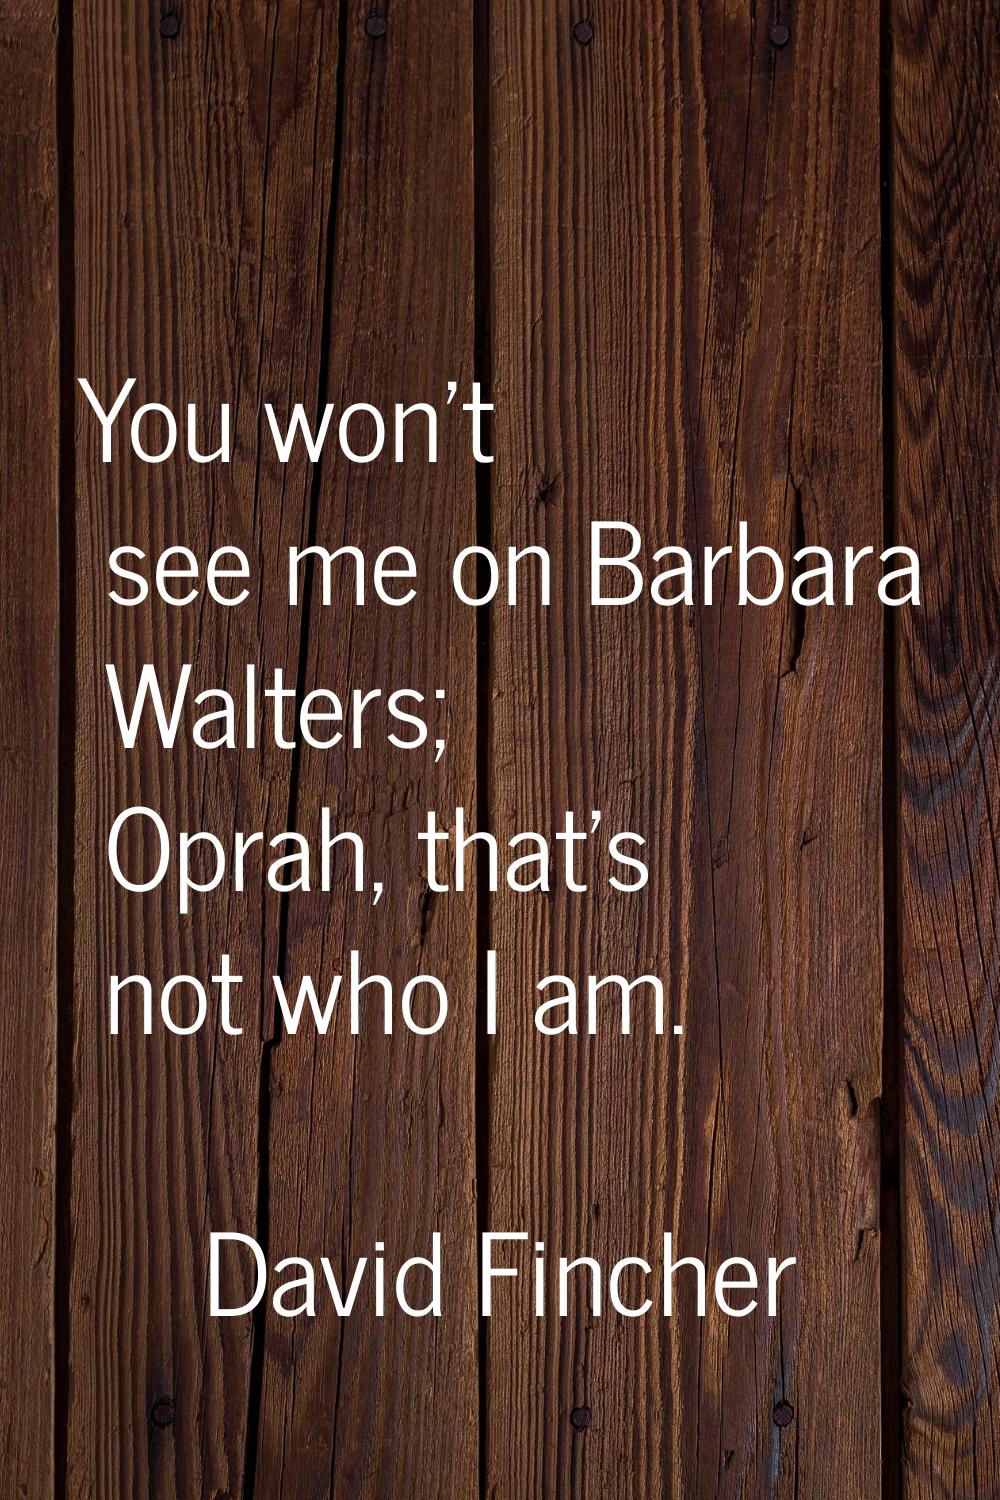 You won't see me on Barbara Walters; Oprah, that's not who I am.